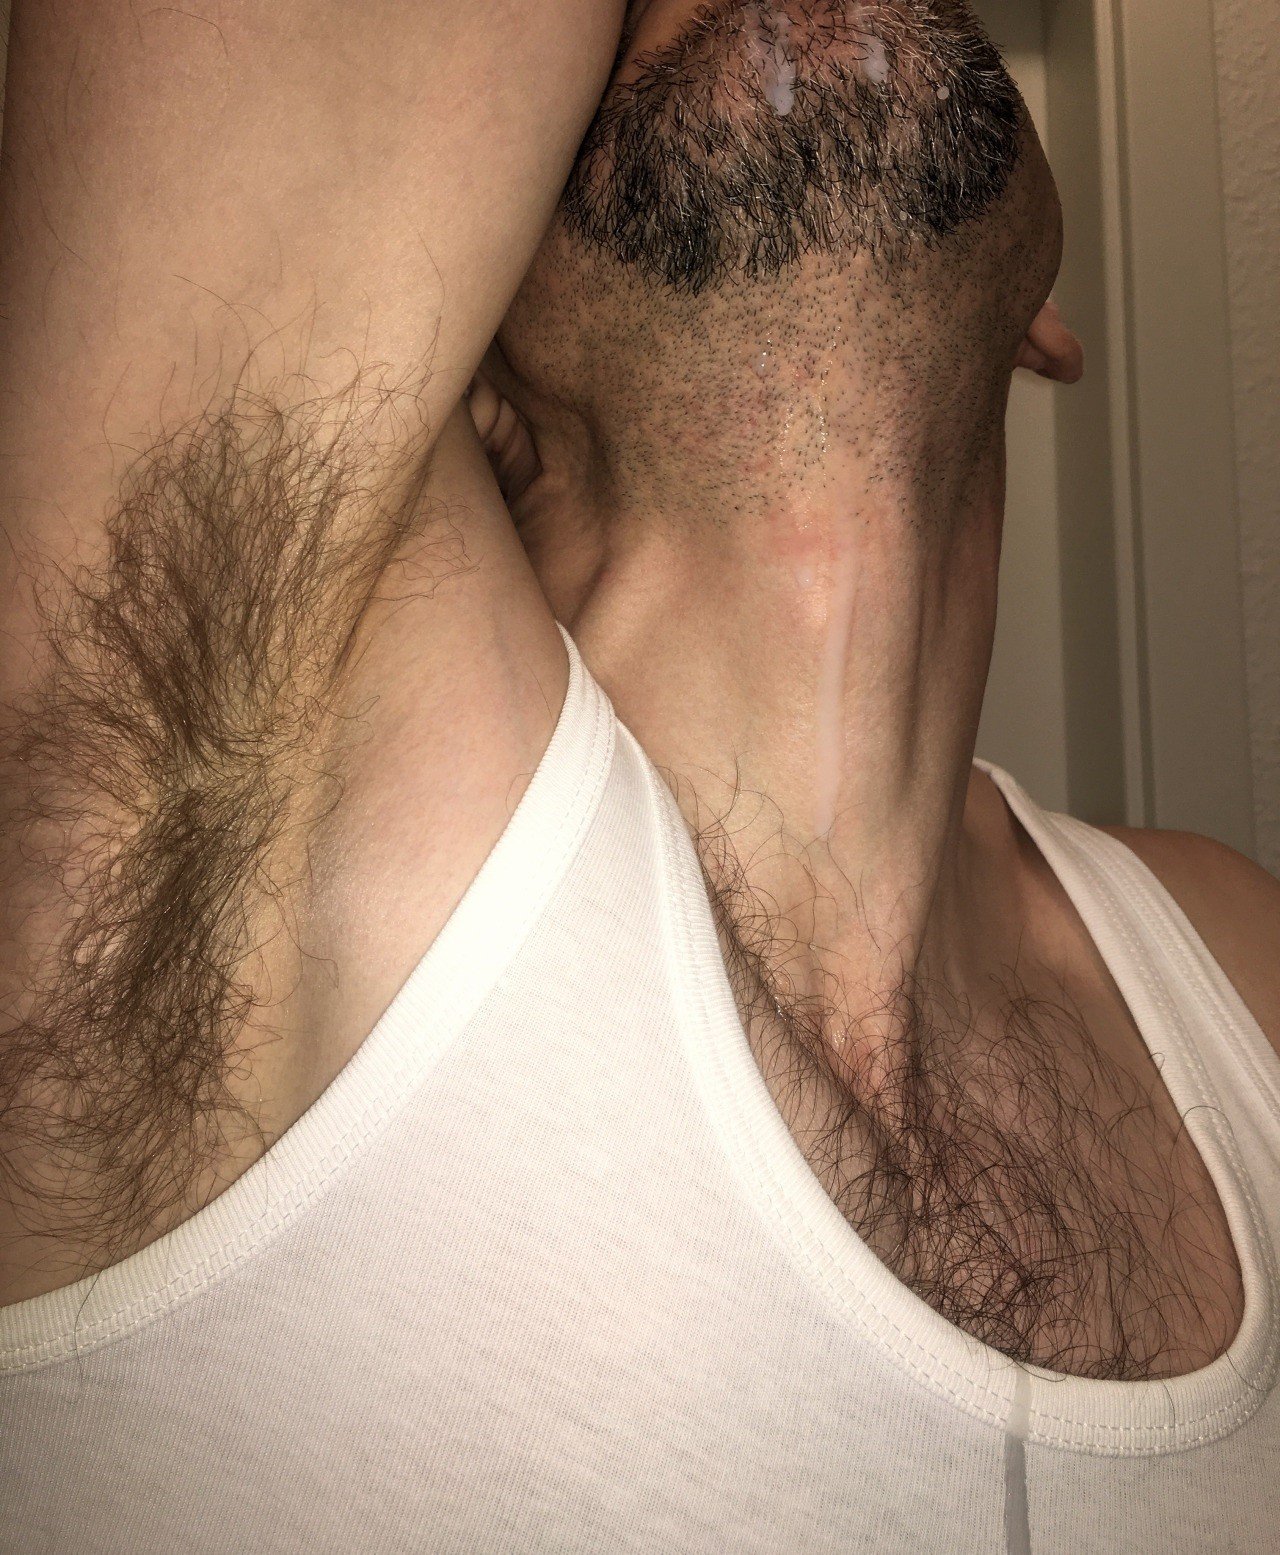 Photo by Smitty with the username @Resol702,  October 21, 2019 at 5:37 PM. The post is about the topic Gay Hairy Armpits